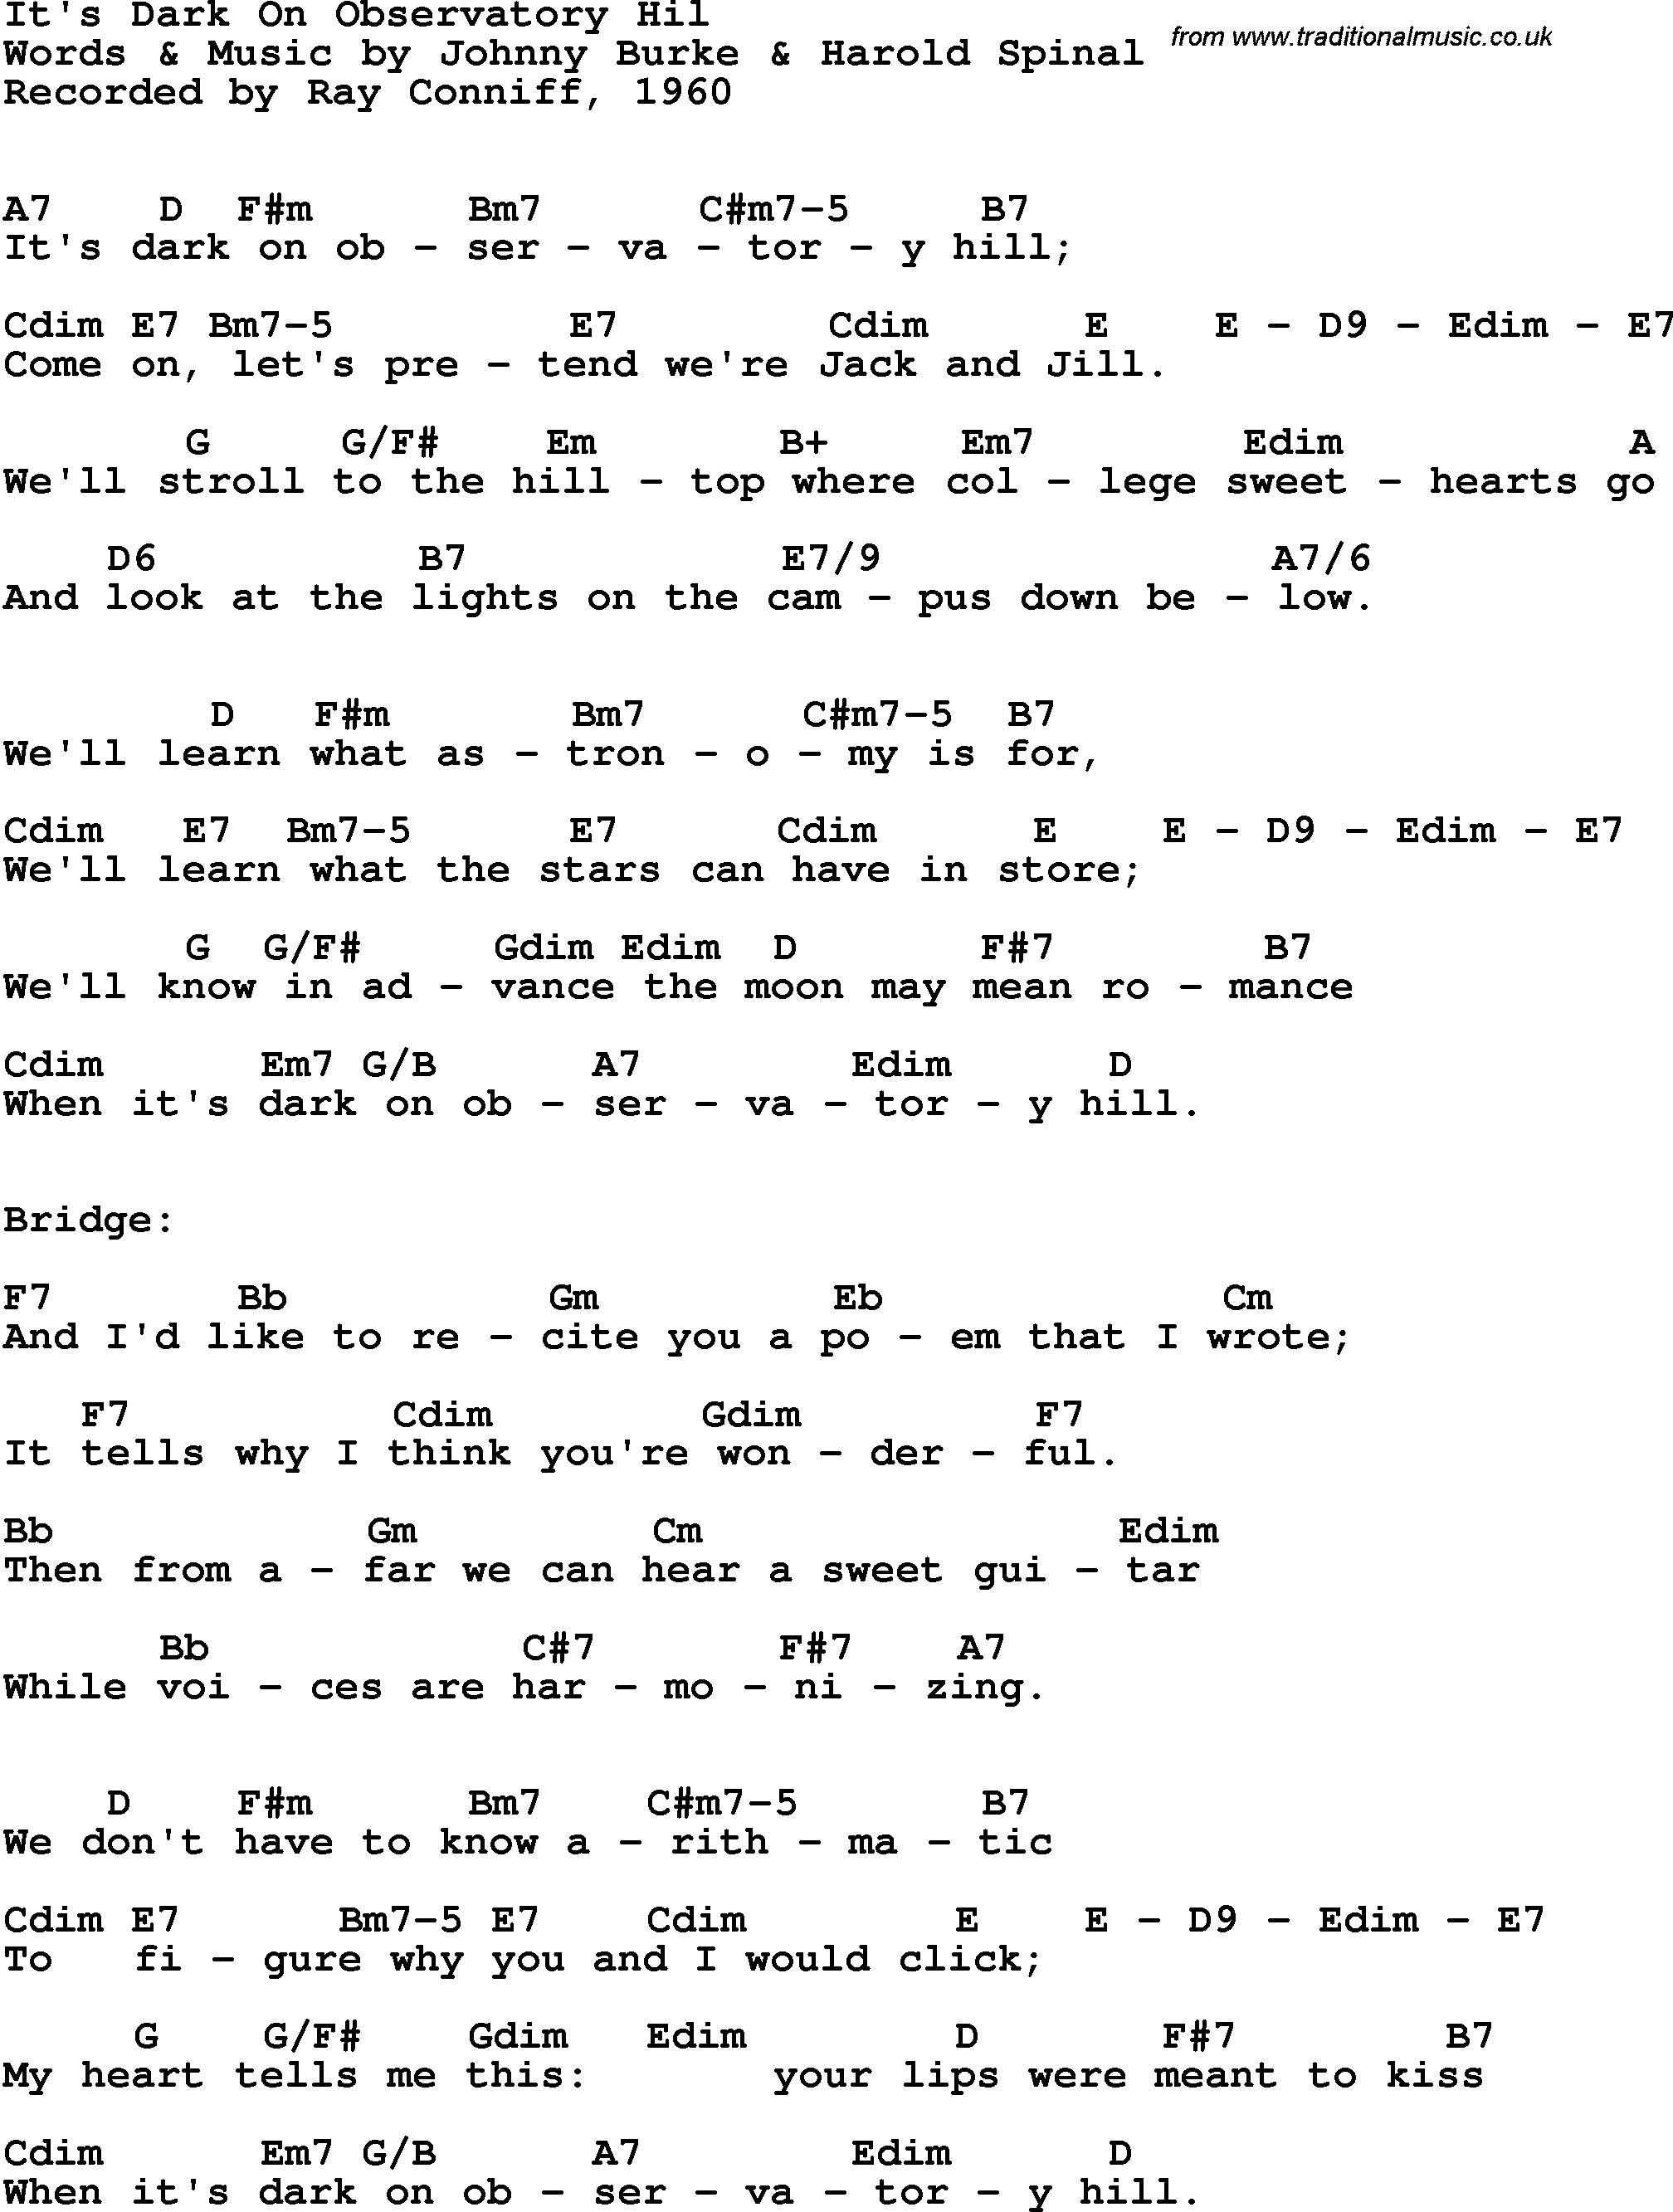 Song Lyrics with guitar chords for It's Dark On Observatory Hill - Ray Conniff, 1960